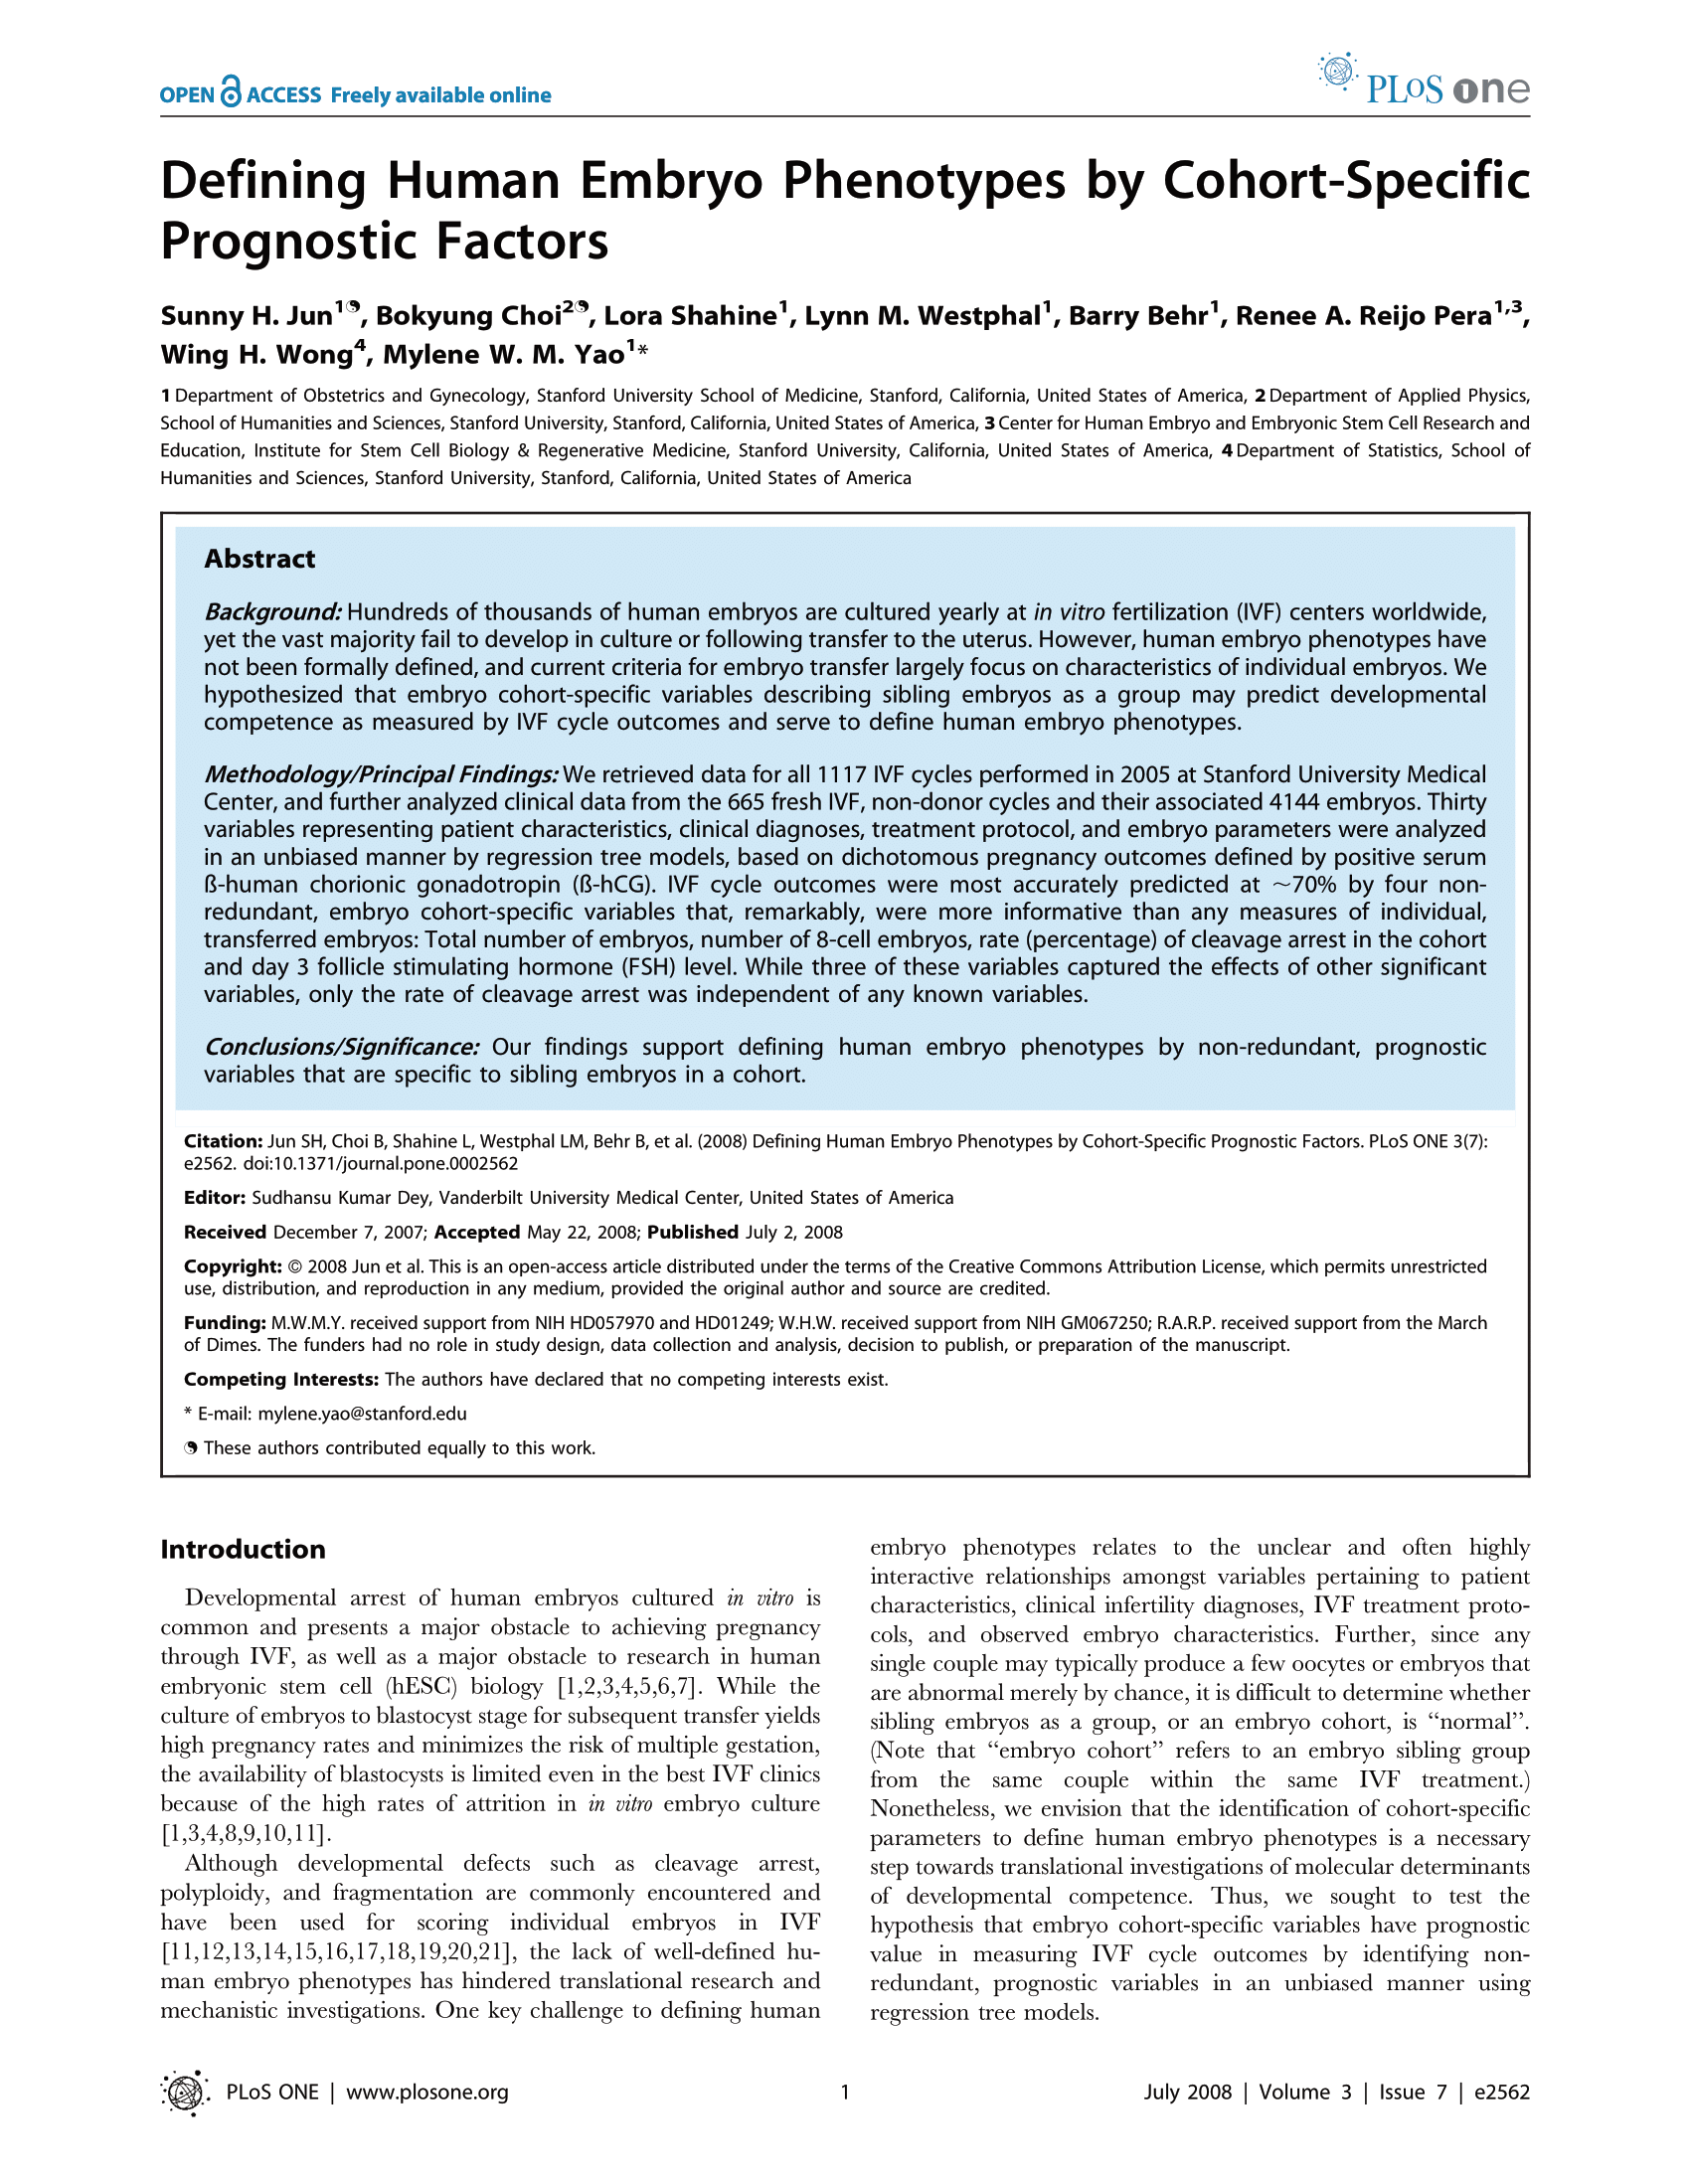 2008 Research Page 1